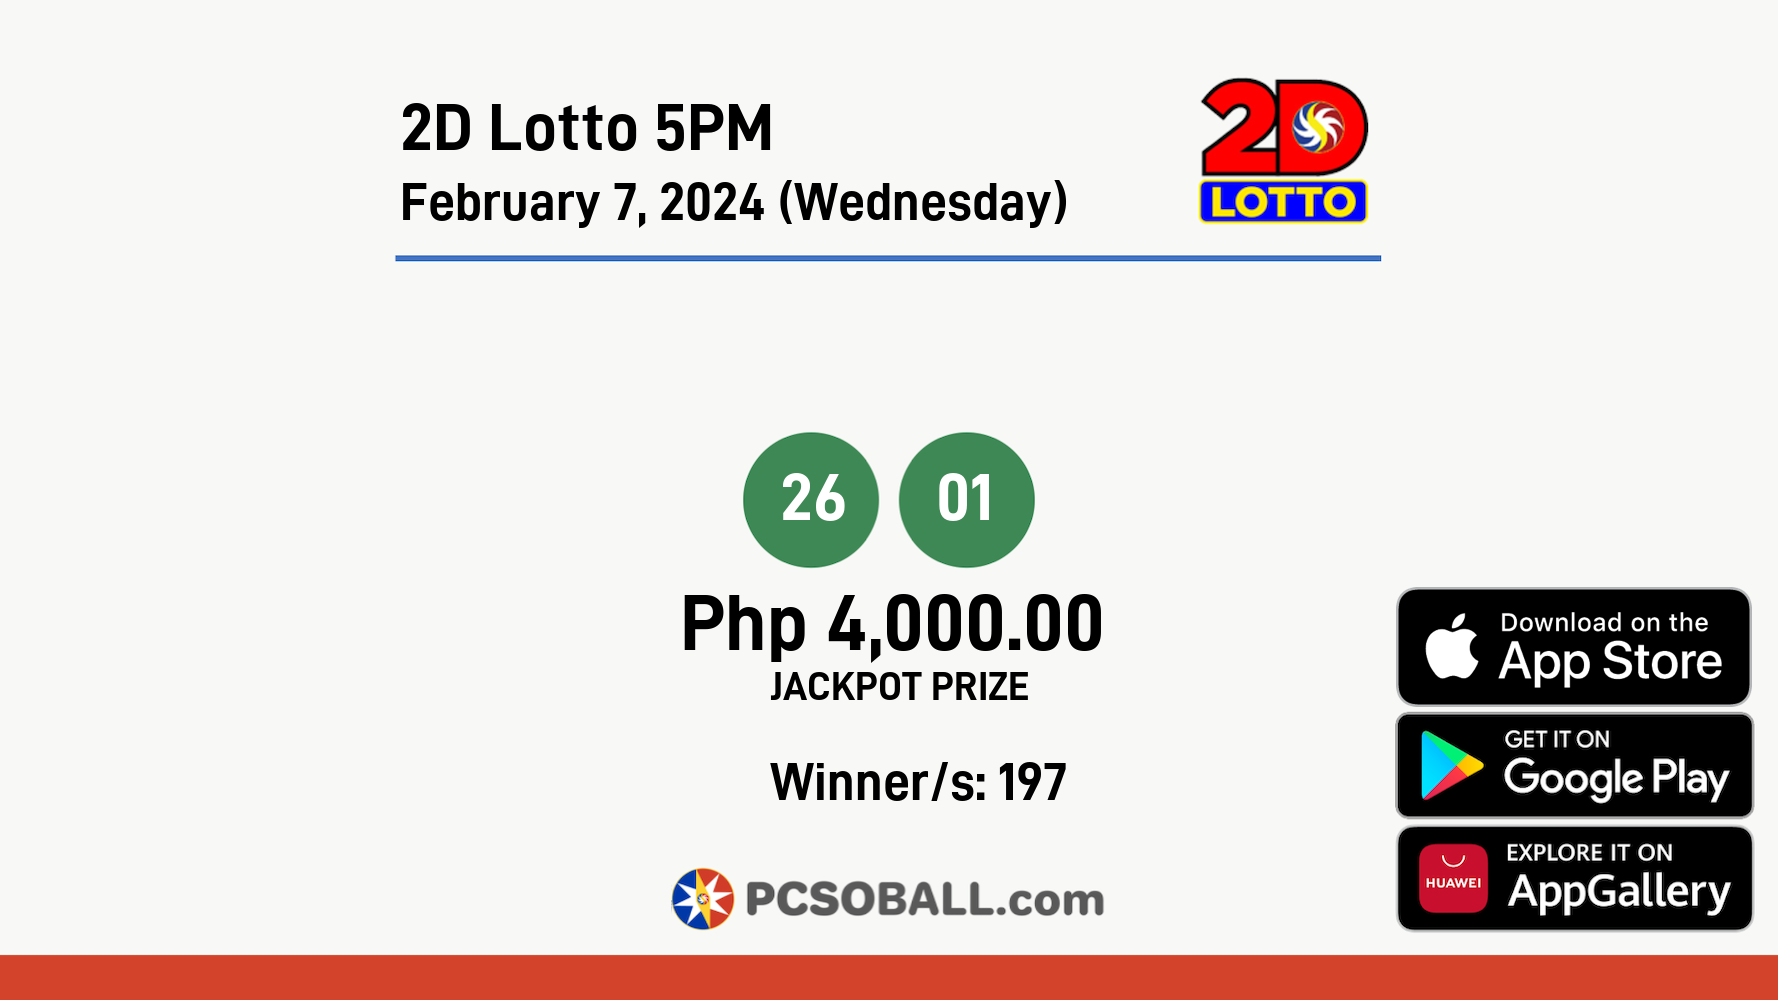 2D Lotto 5PM February 7, 2024 (Wednesday) Result